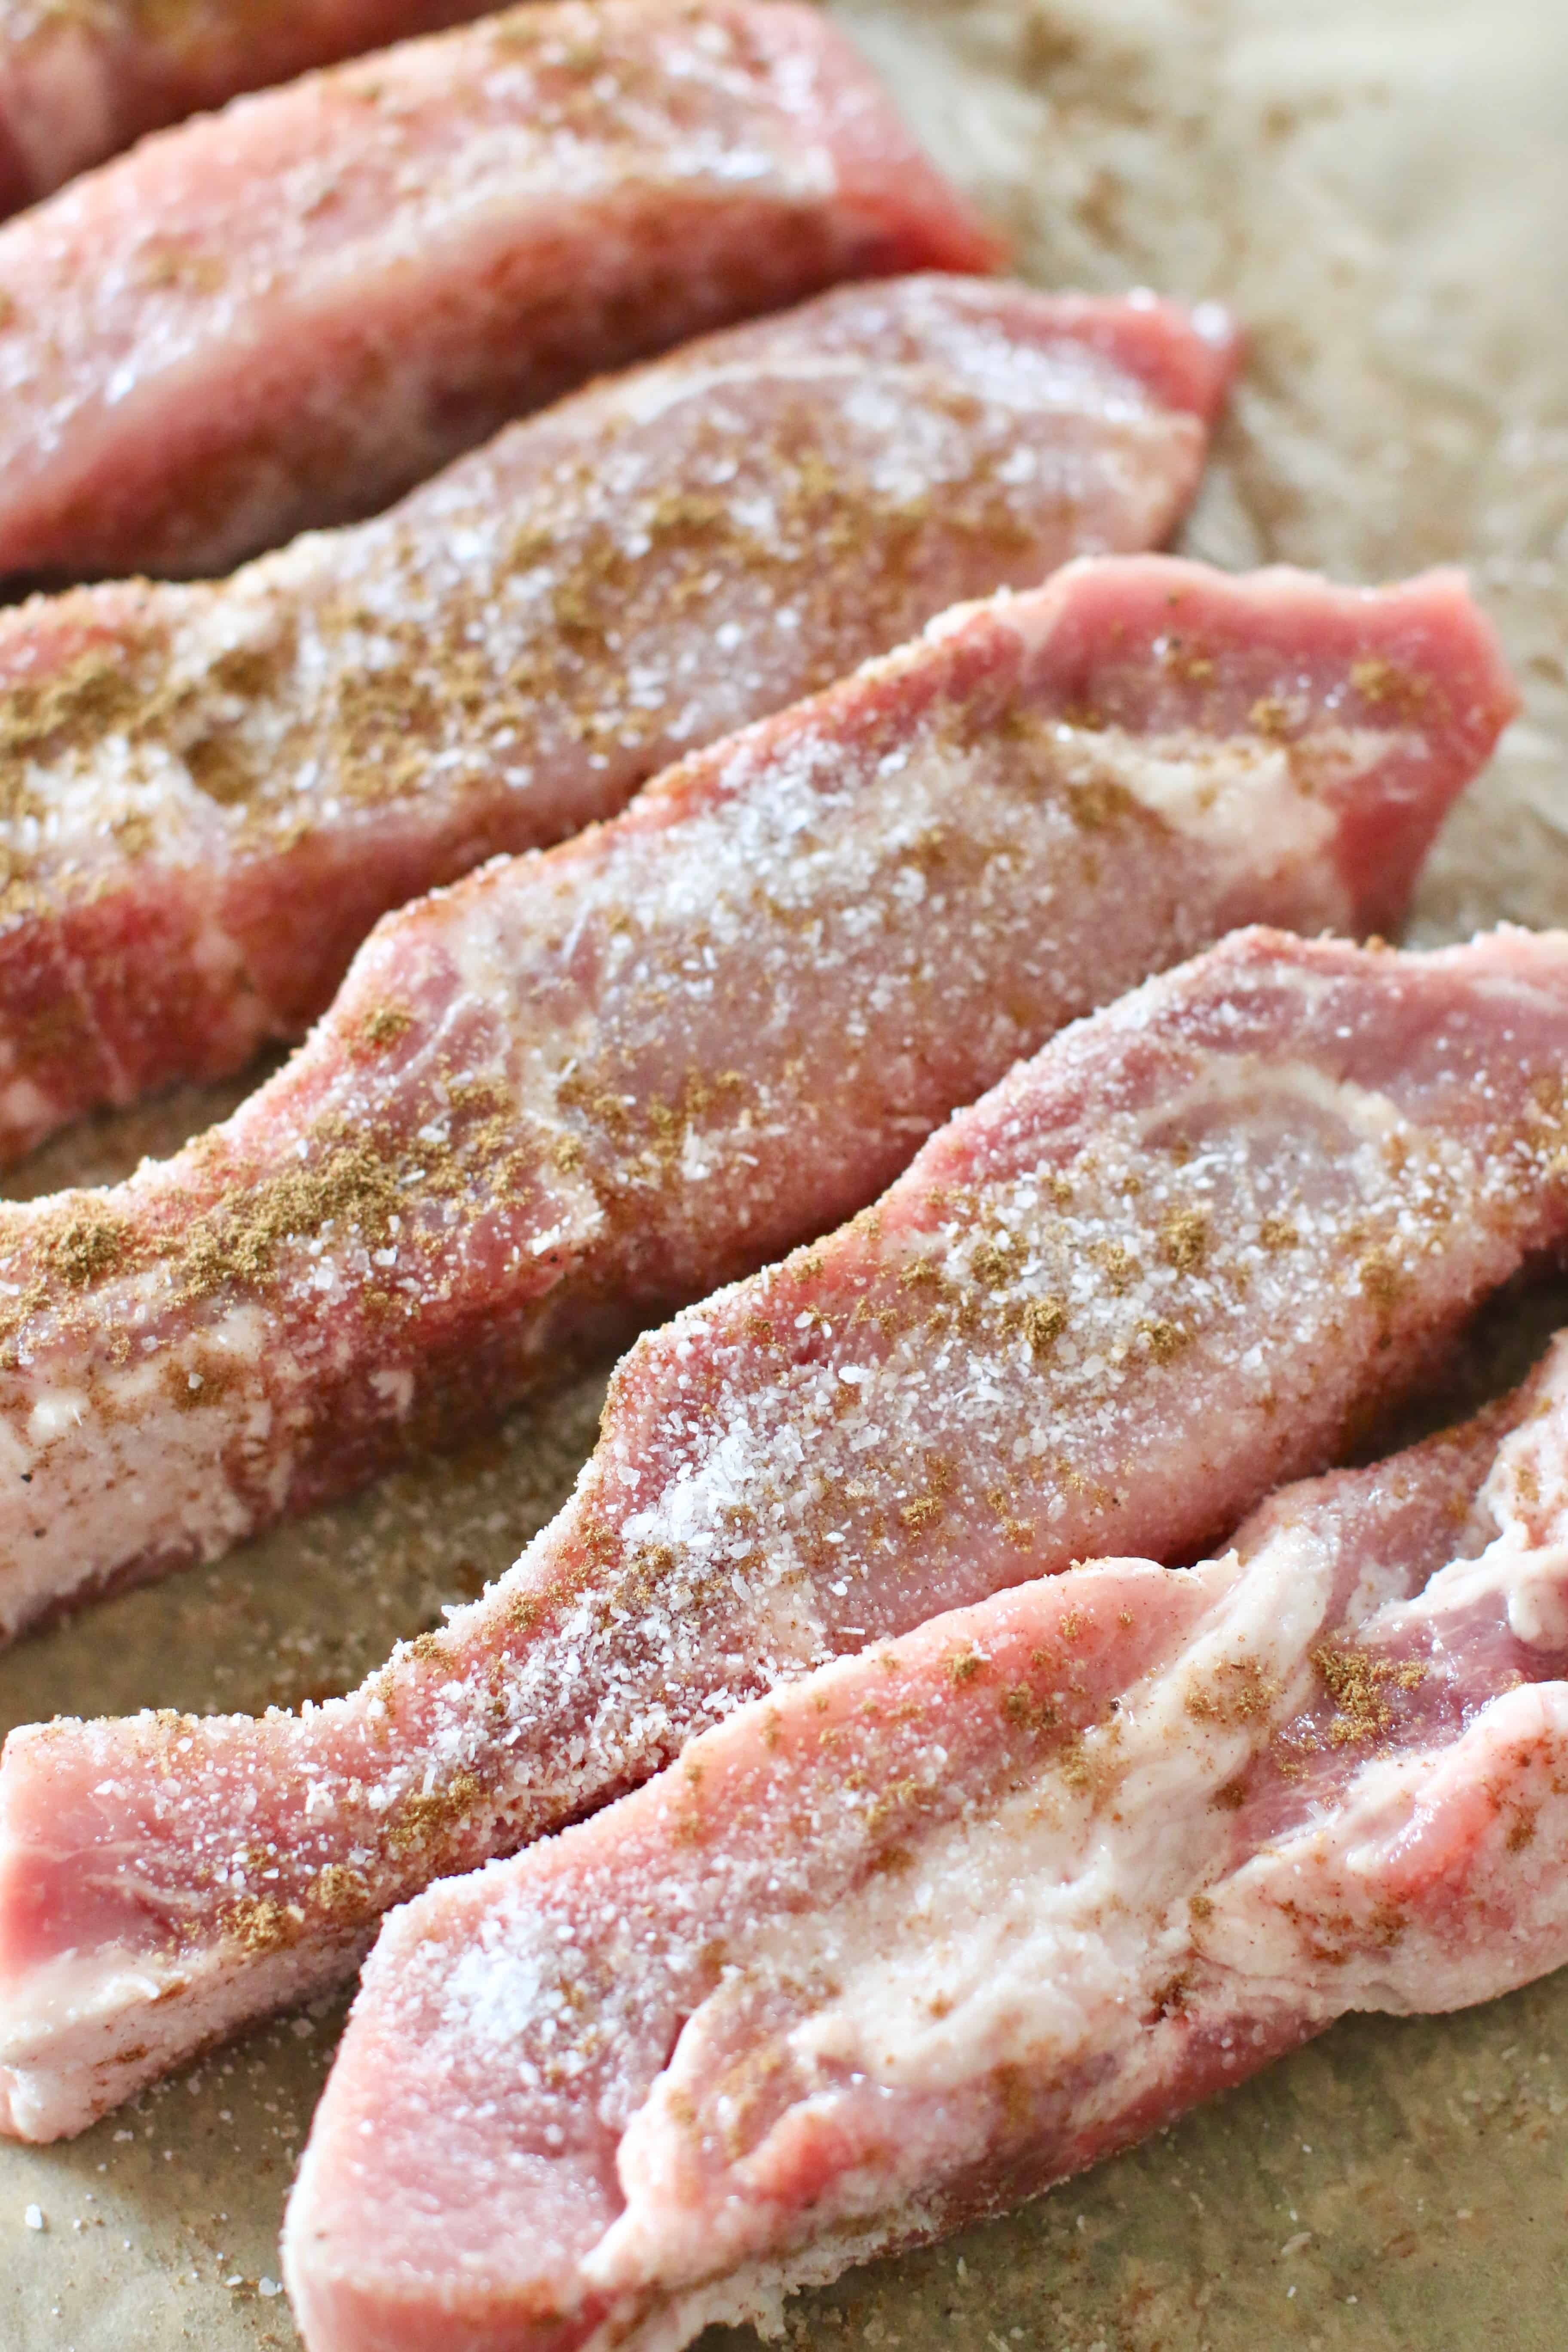 country style ribs seasoned with salt and Chinese five spice seasoning.